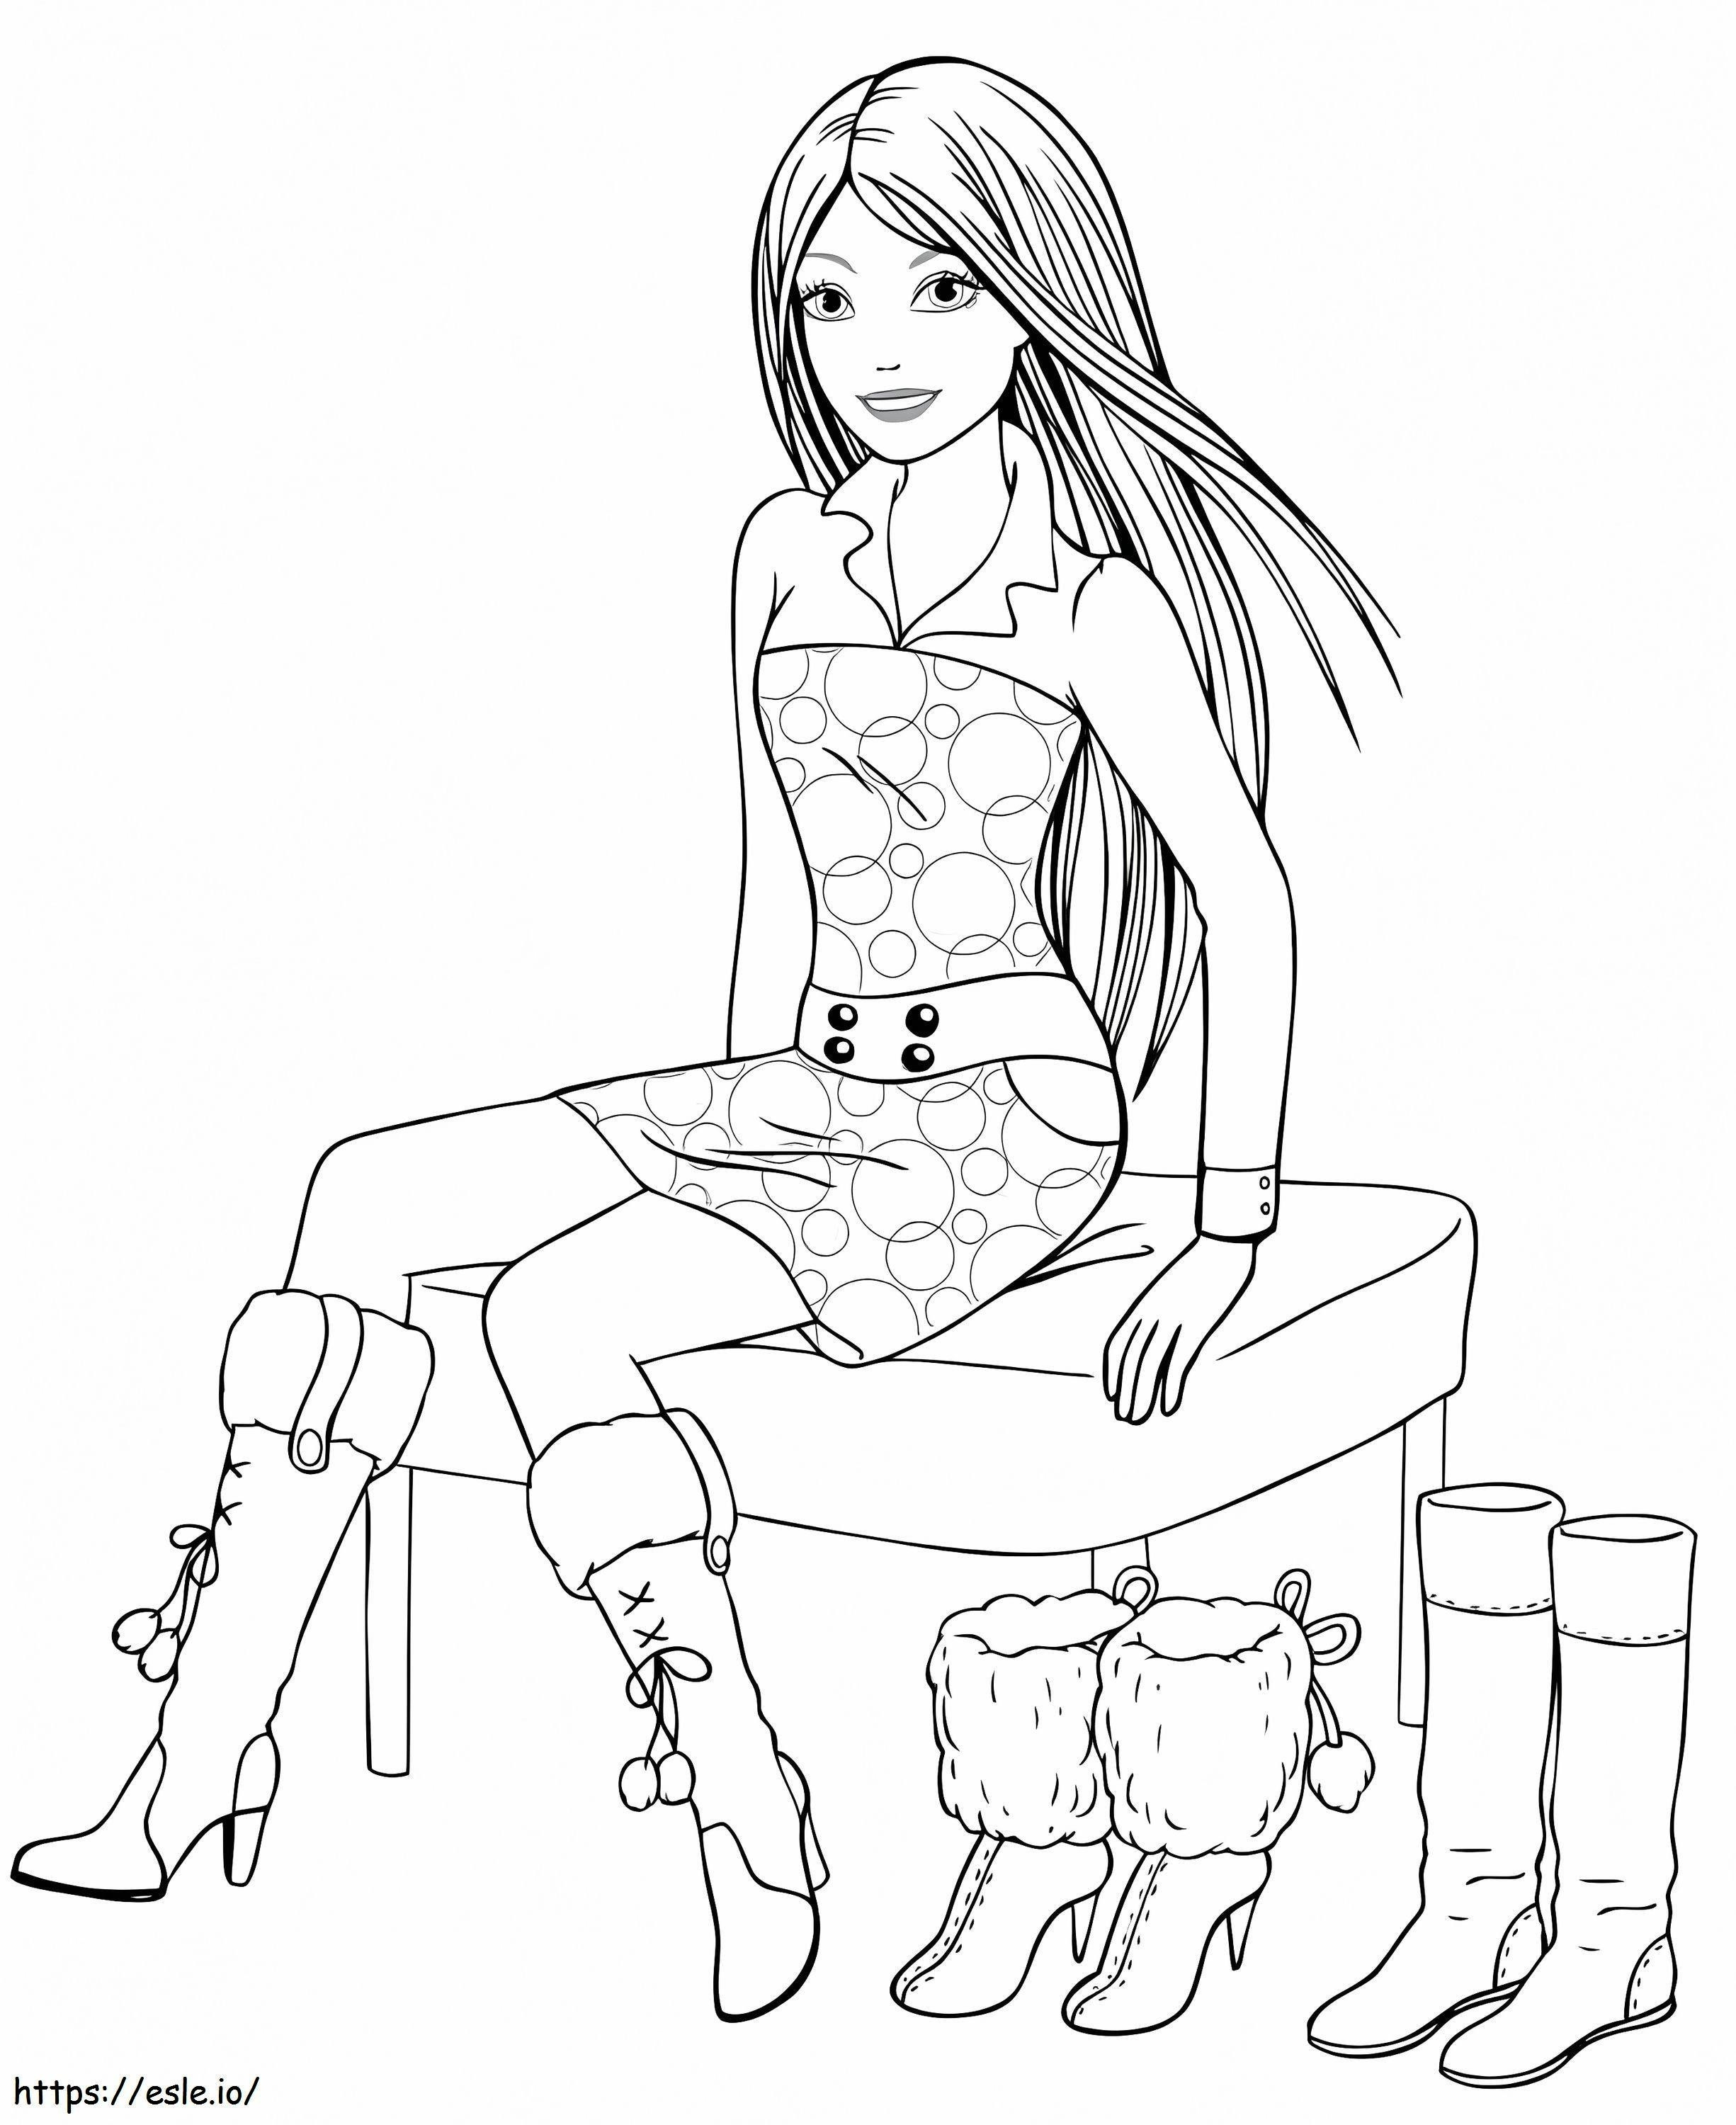 Girl With Three Shoes coloring page